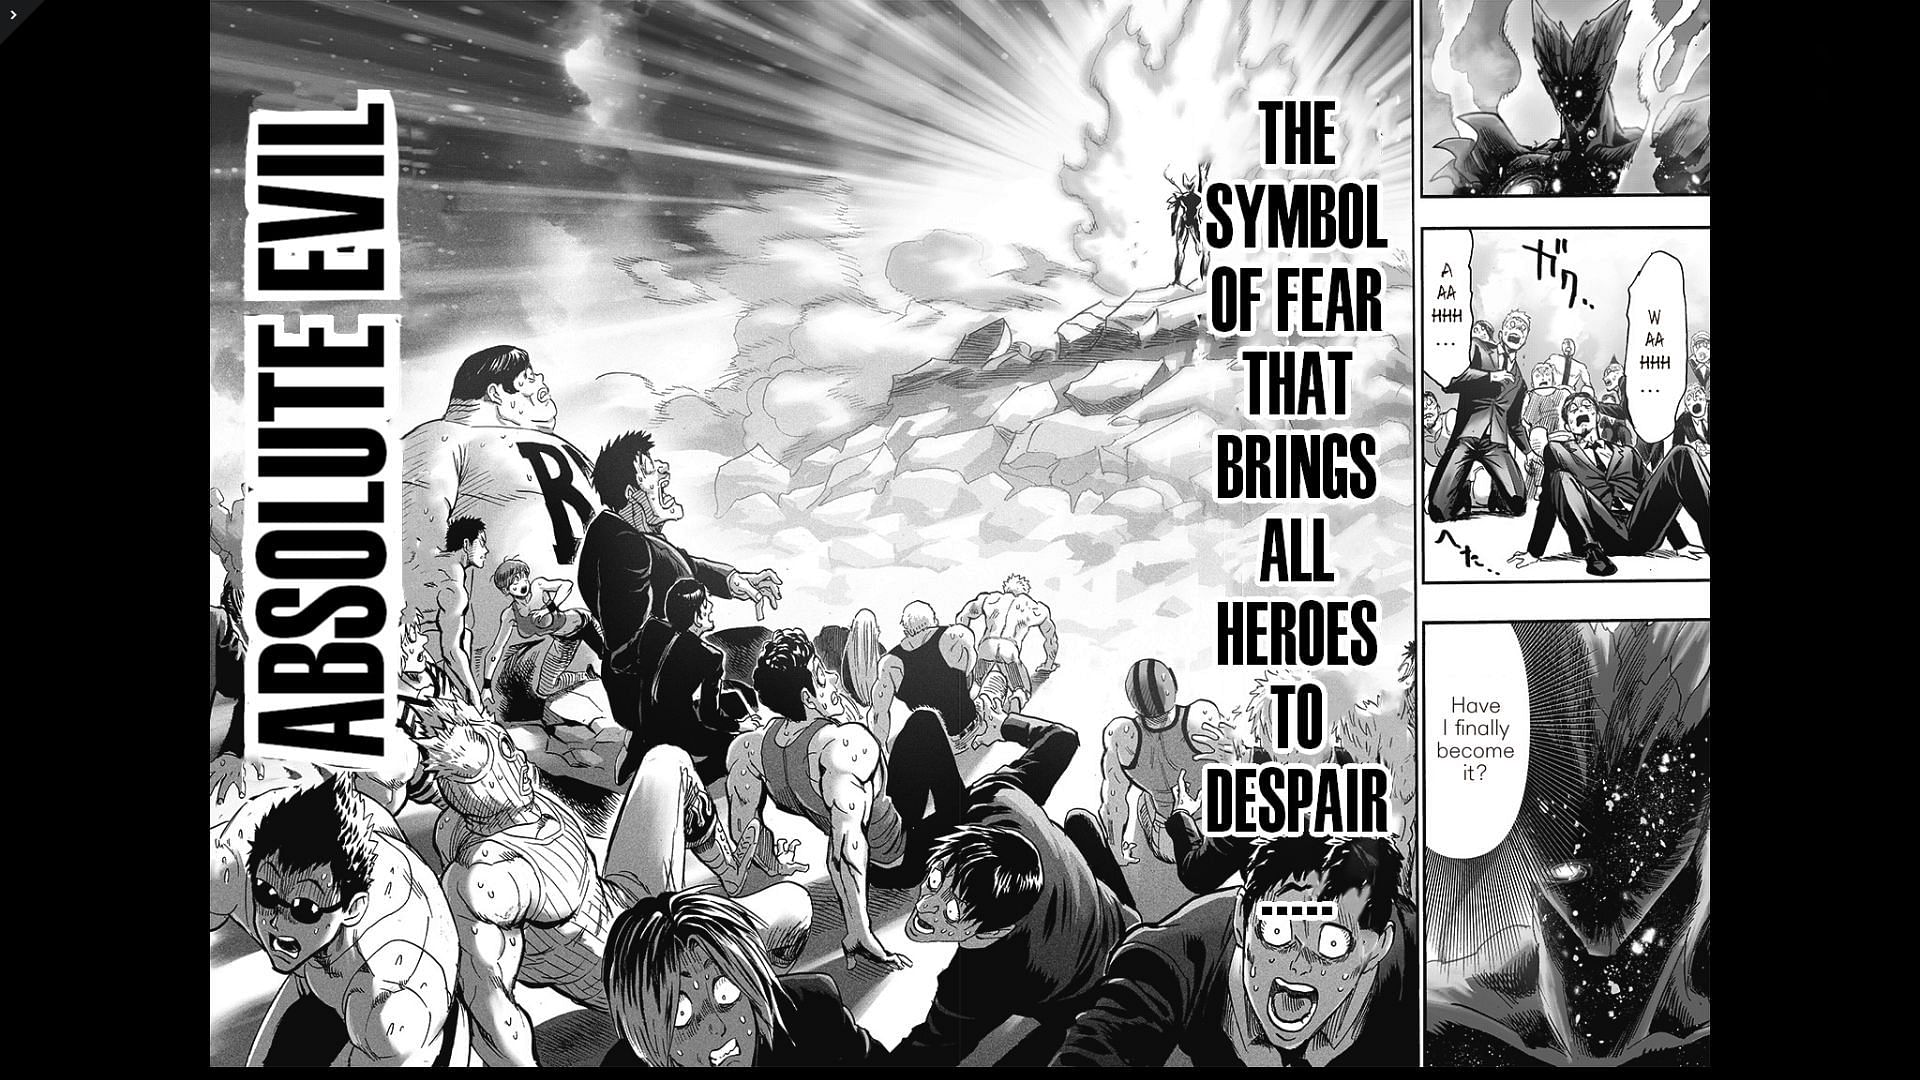 garou the absolute evil (one punch man) vs superman the symbol of hope (DC)